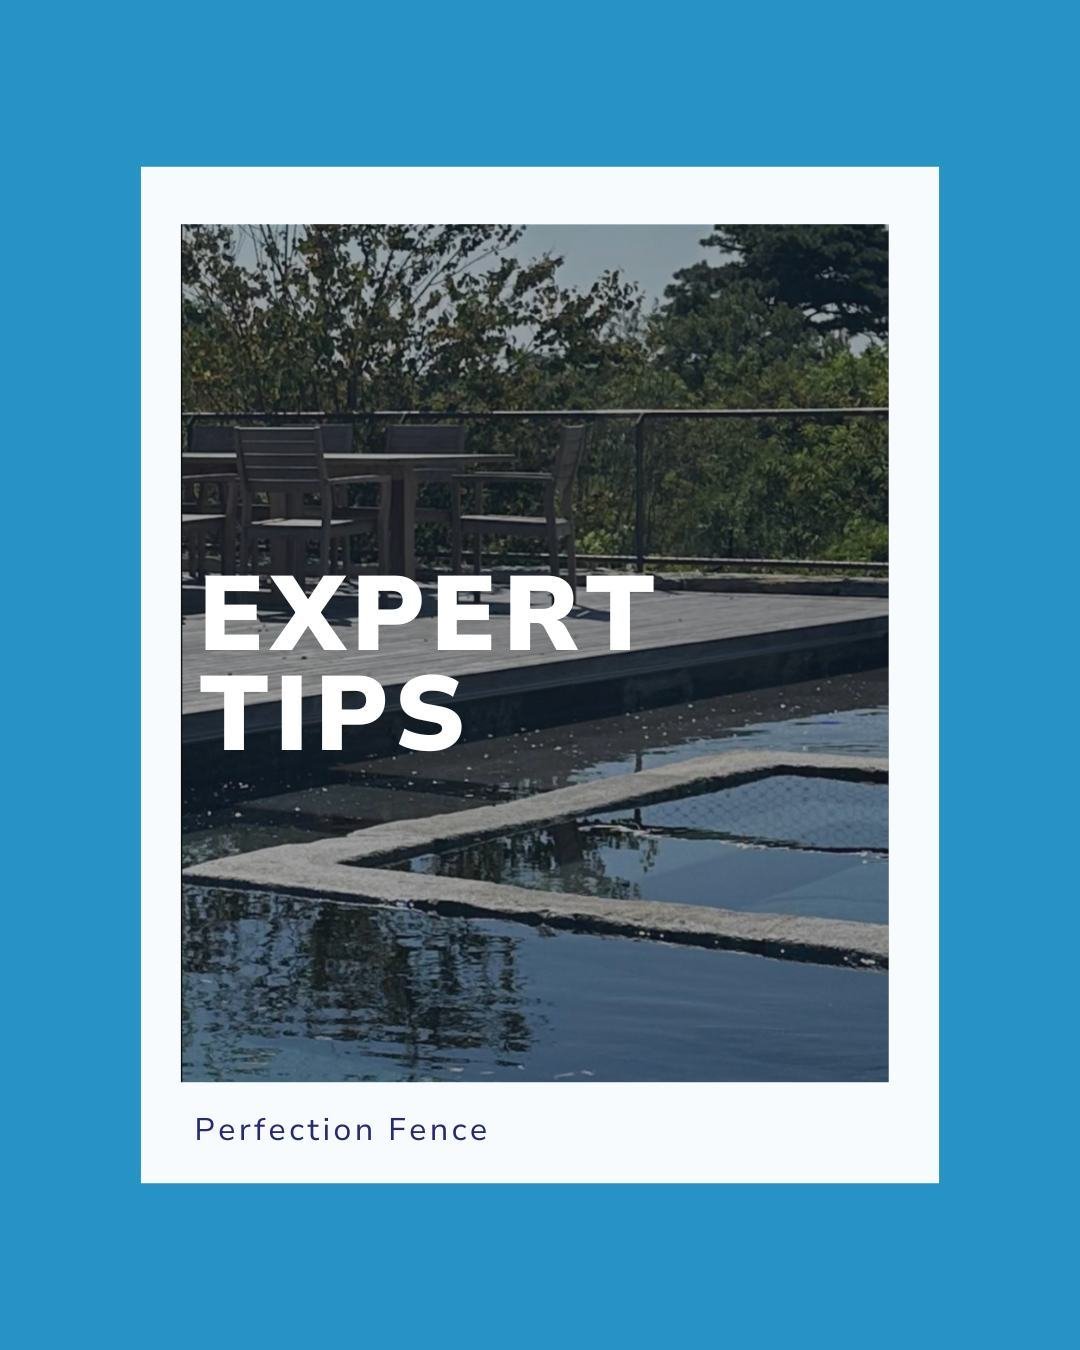 ⭐️Expert Tip⭐️
ㅤ
From #AMPclient @perfectionfence:
ㅤ
Safety meets aesthetics! Ensure your pool area is secured with a fence that not only keeps everyone safe but also adds a pleasing touch to the eye. Dive into safety and style!
ㅤ
#AMPlify #SummerIsC